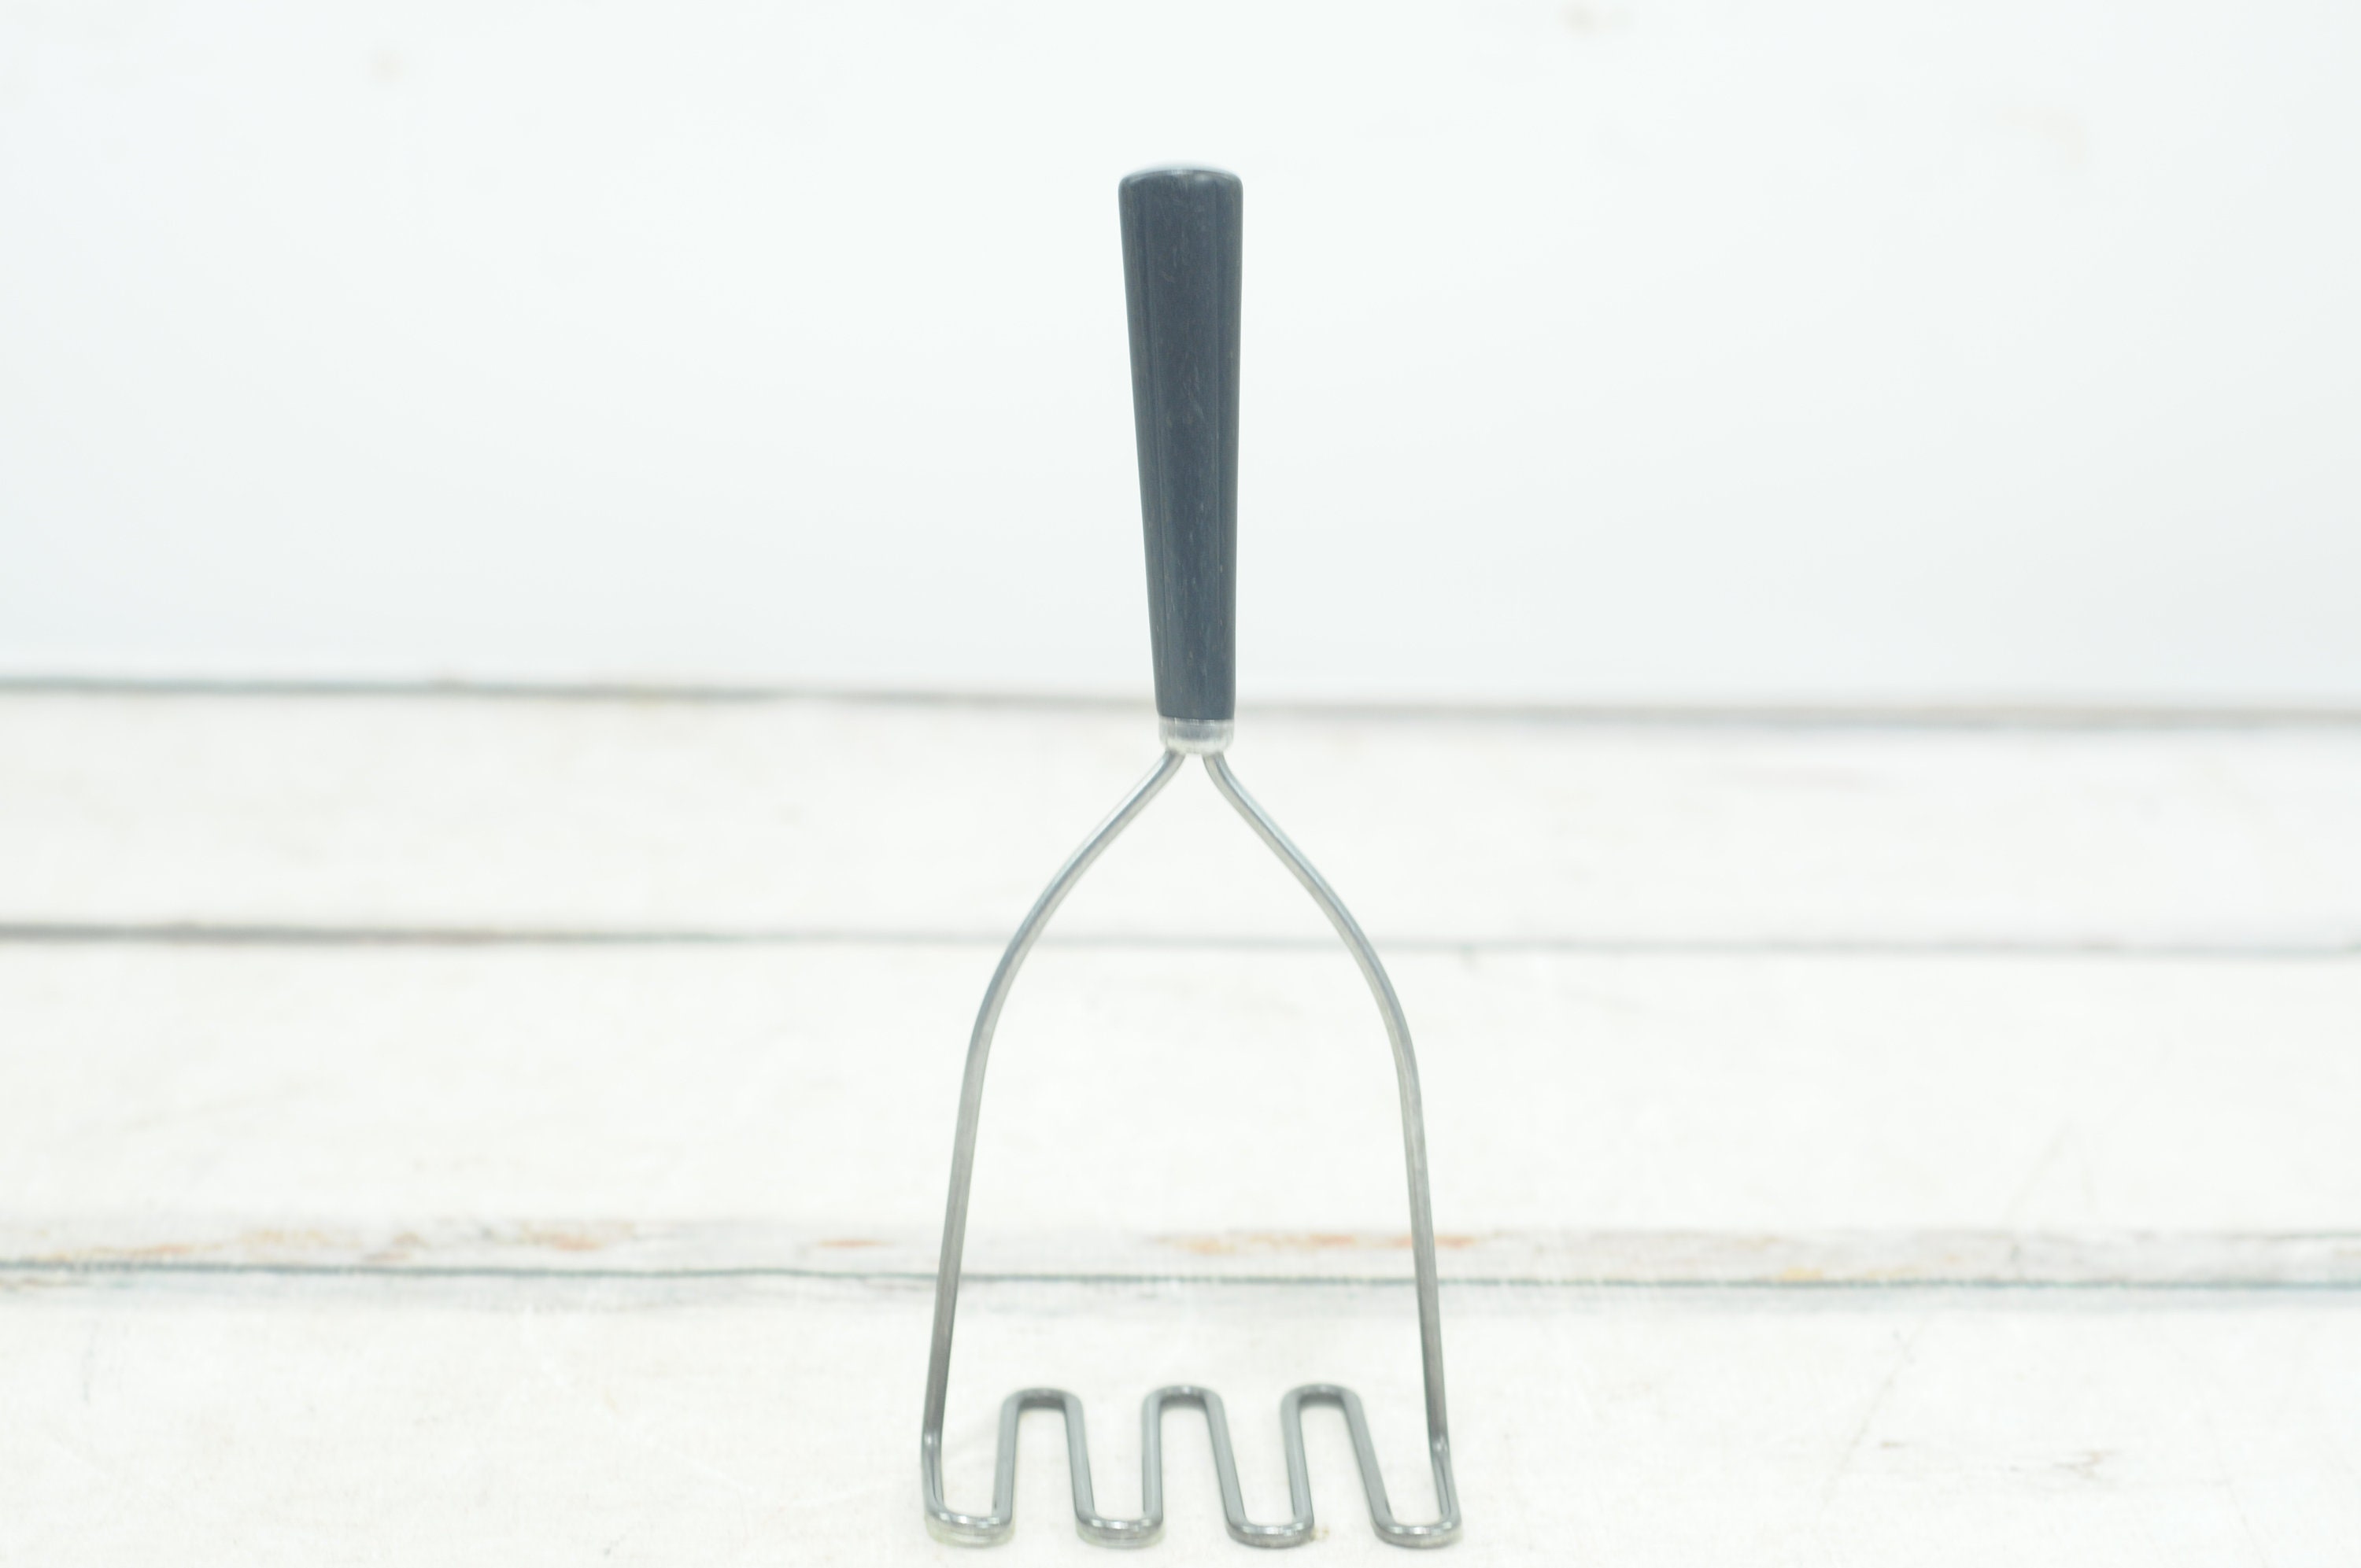 Vintage Hand Potato Masher Stainless Steel With Black Plastic Handle